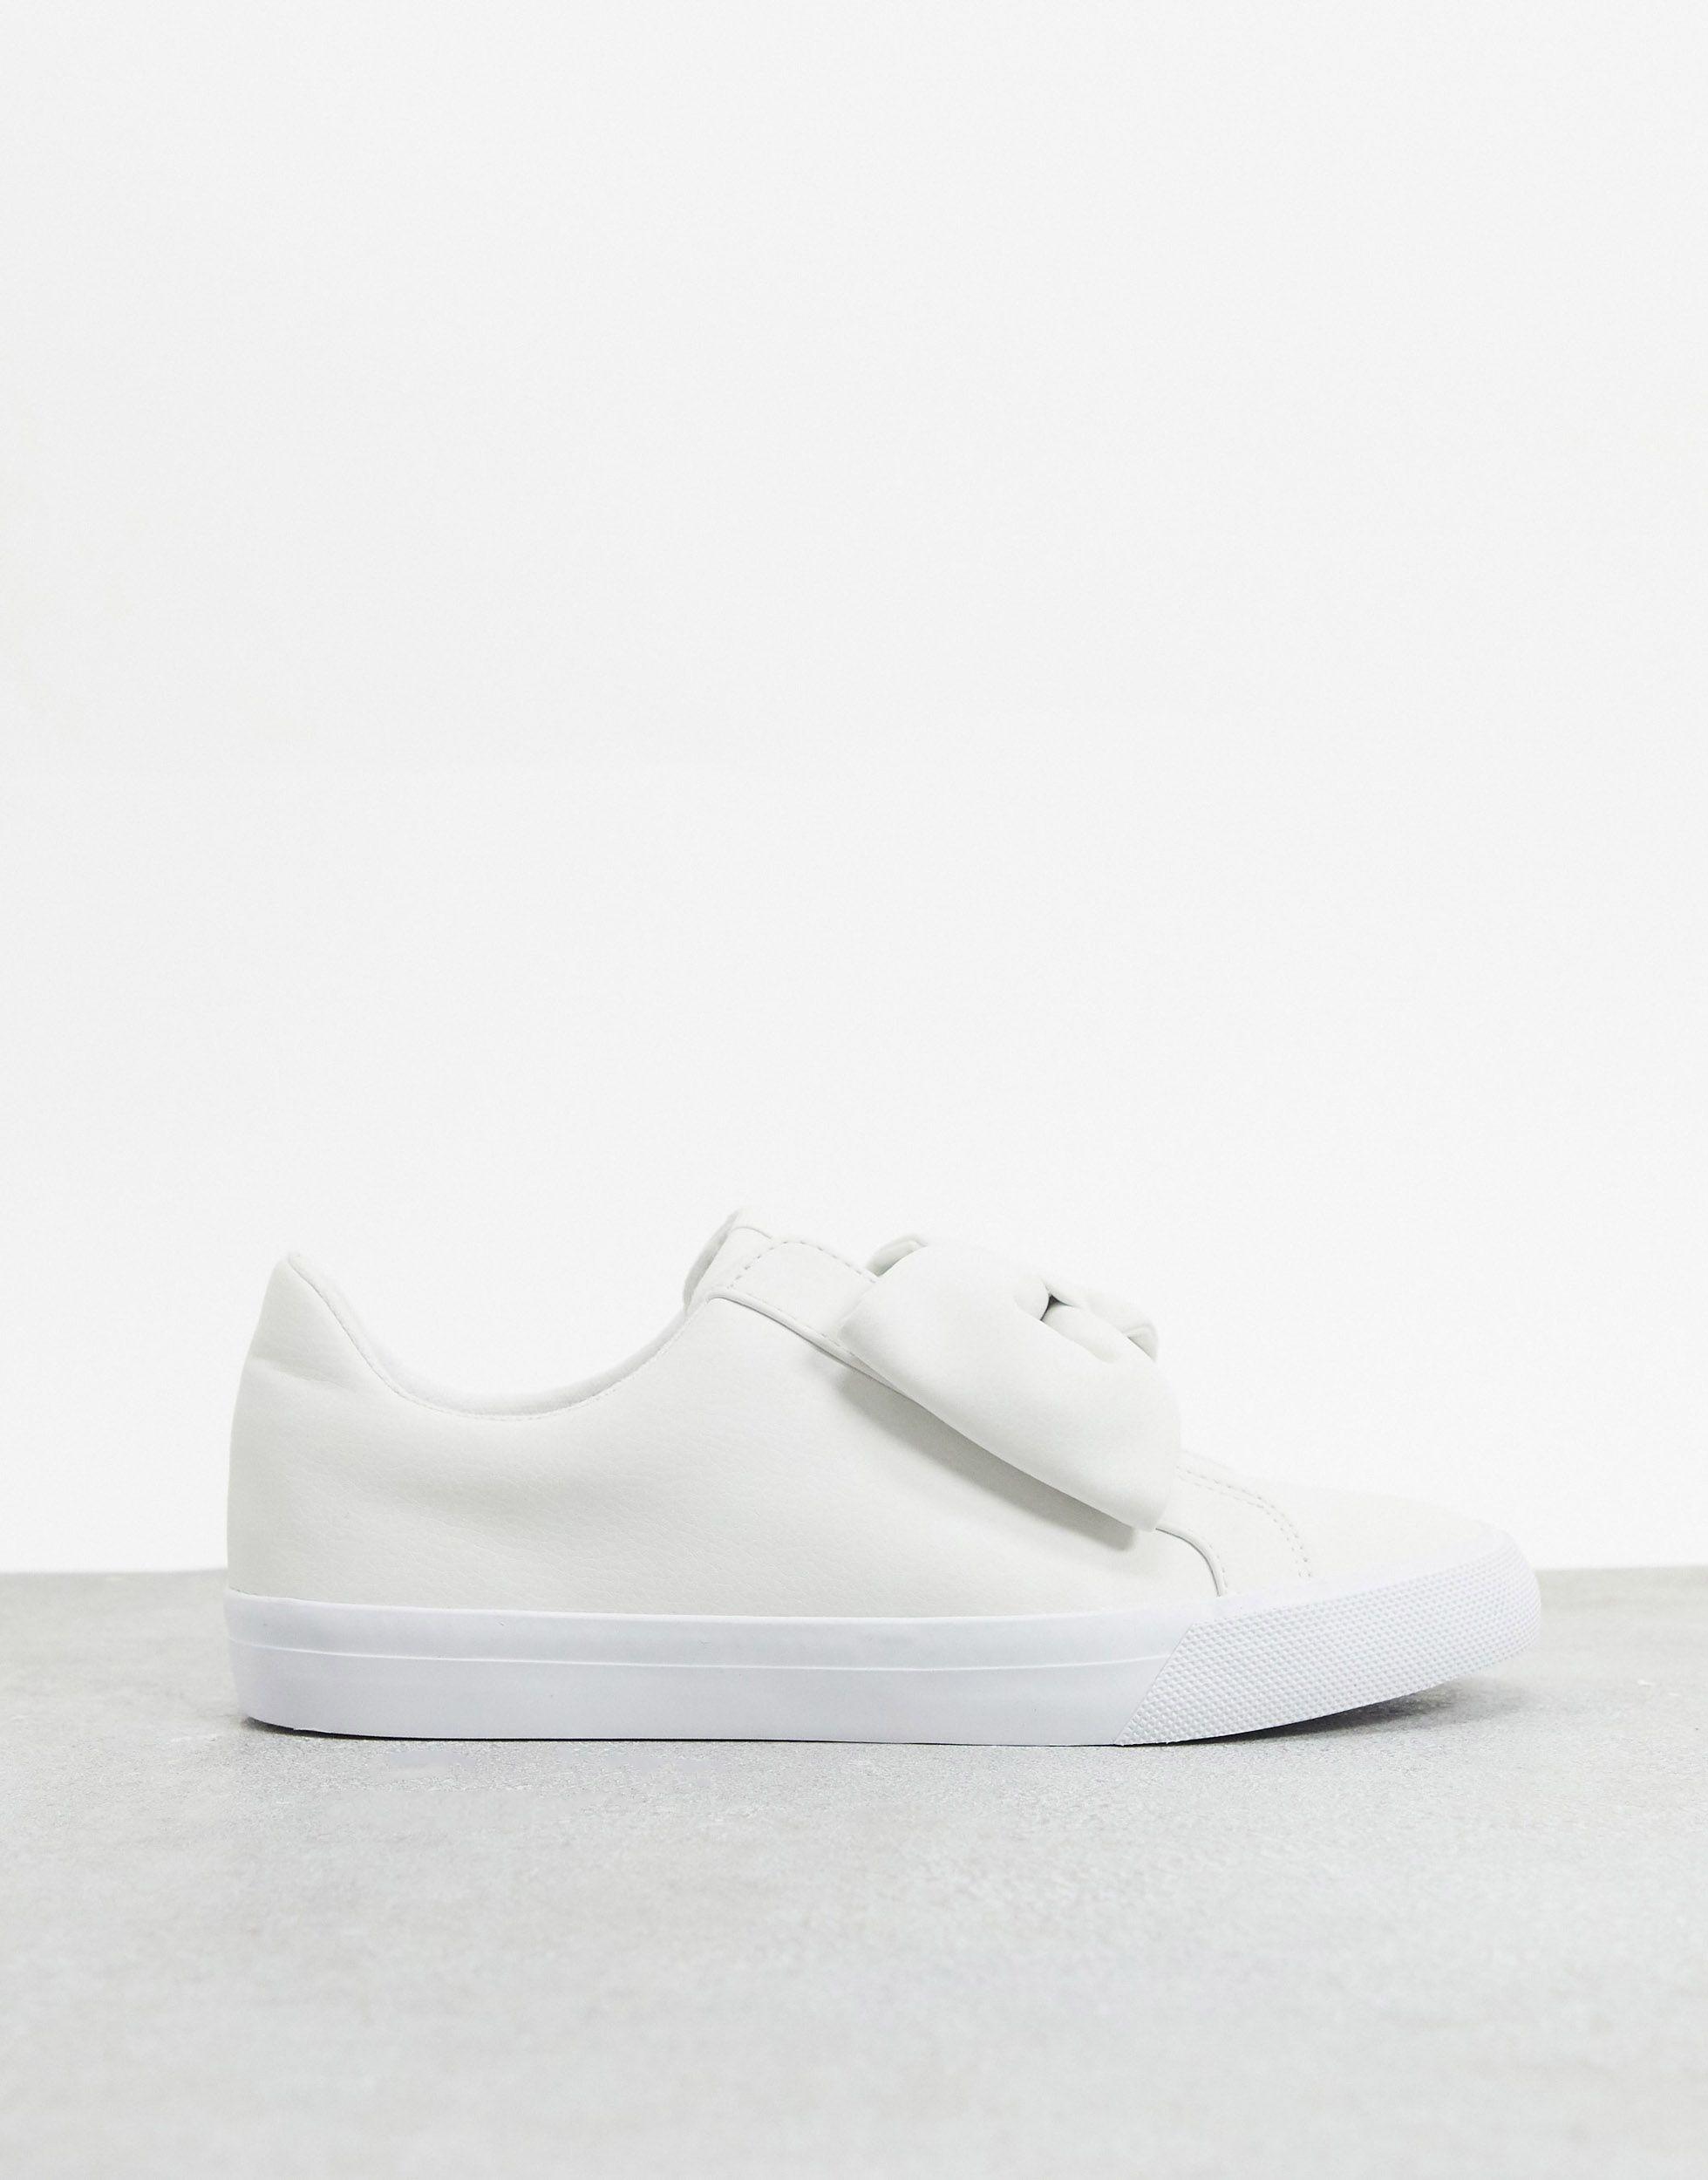 ASOS DESIGN Dollar faux pearl lace up trainers in white | ASOS